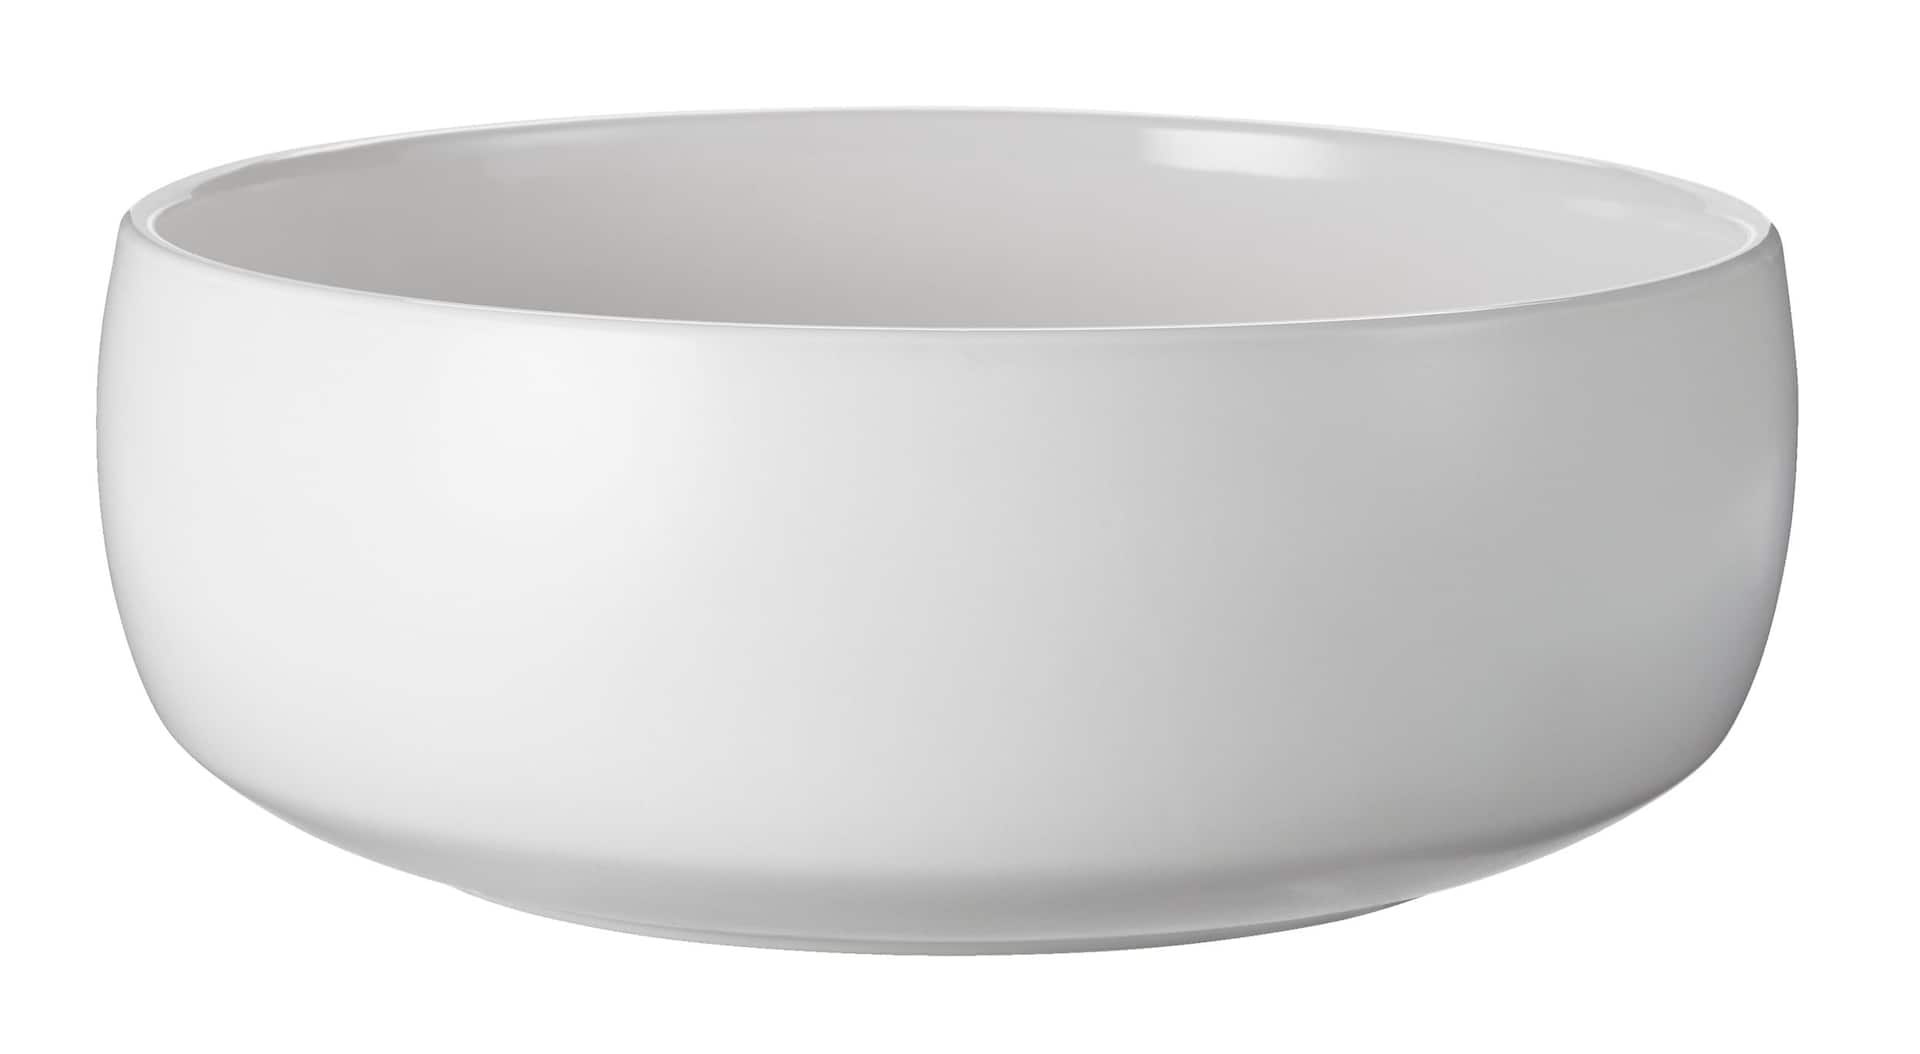 CANVAS Round Stoneware Reusable Serving Bowl, White, 11-in, for New Year's  Eve/Christmas/Graduation